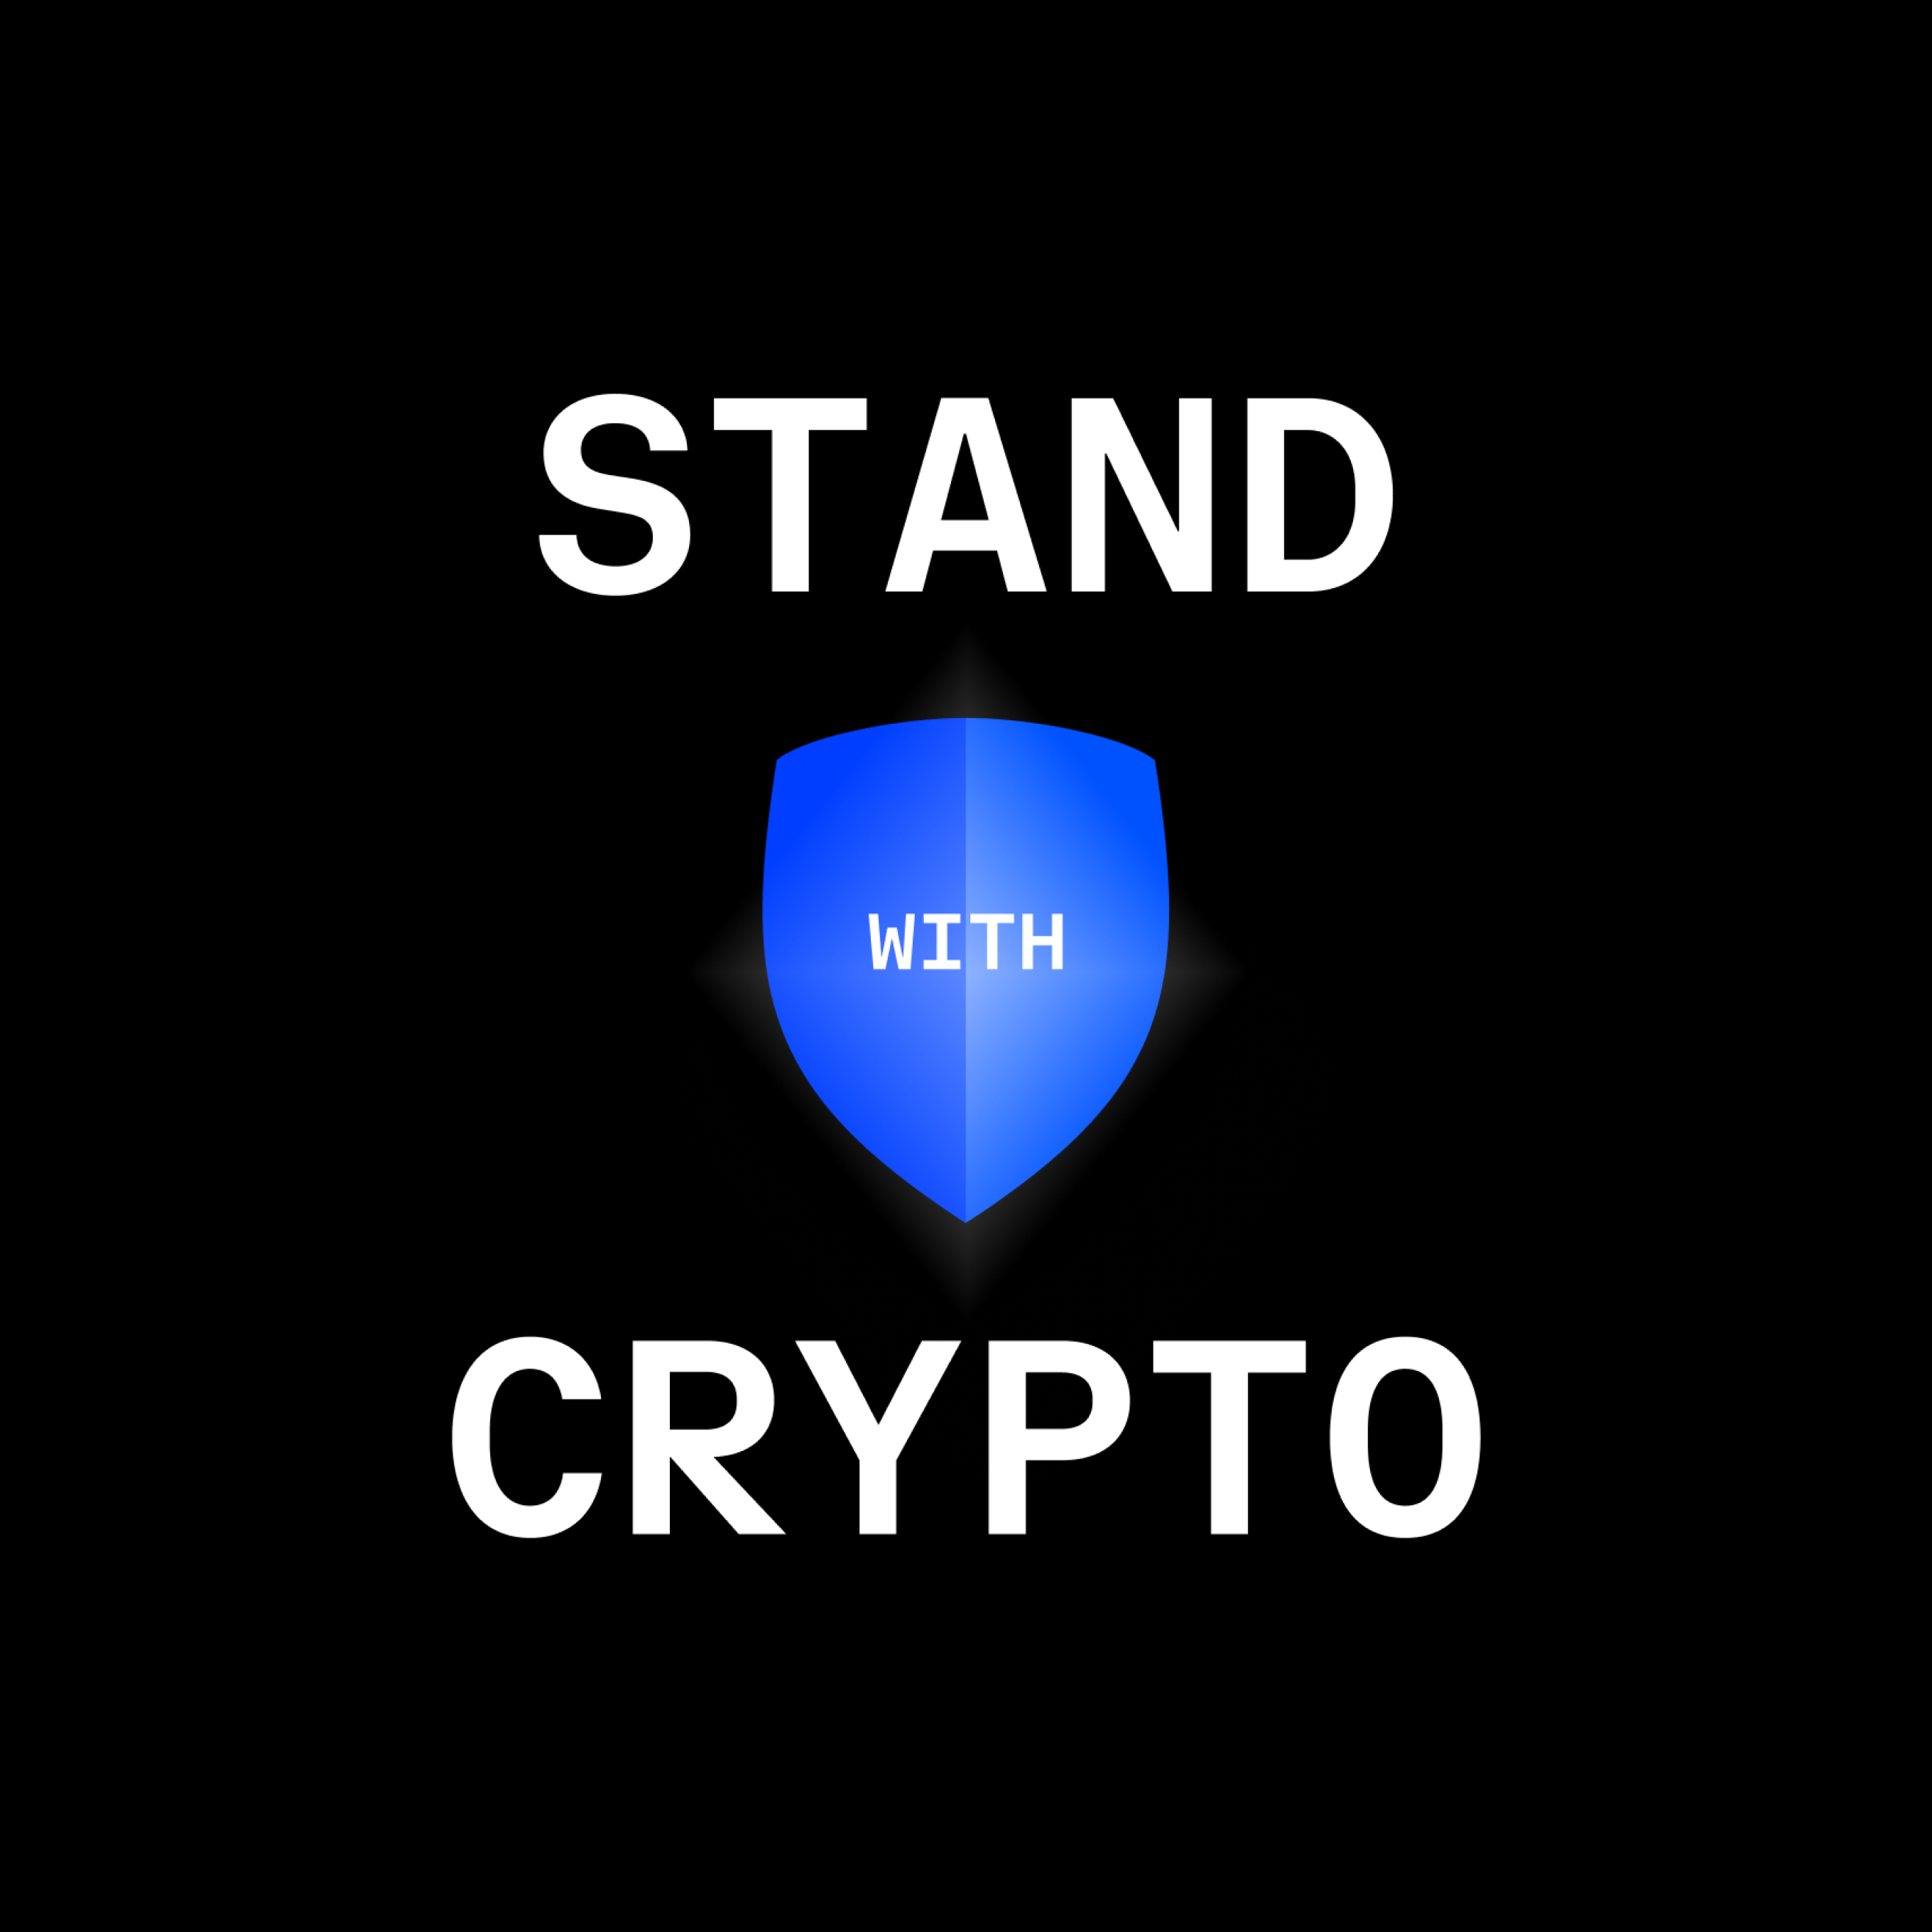 Stand with cyypto